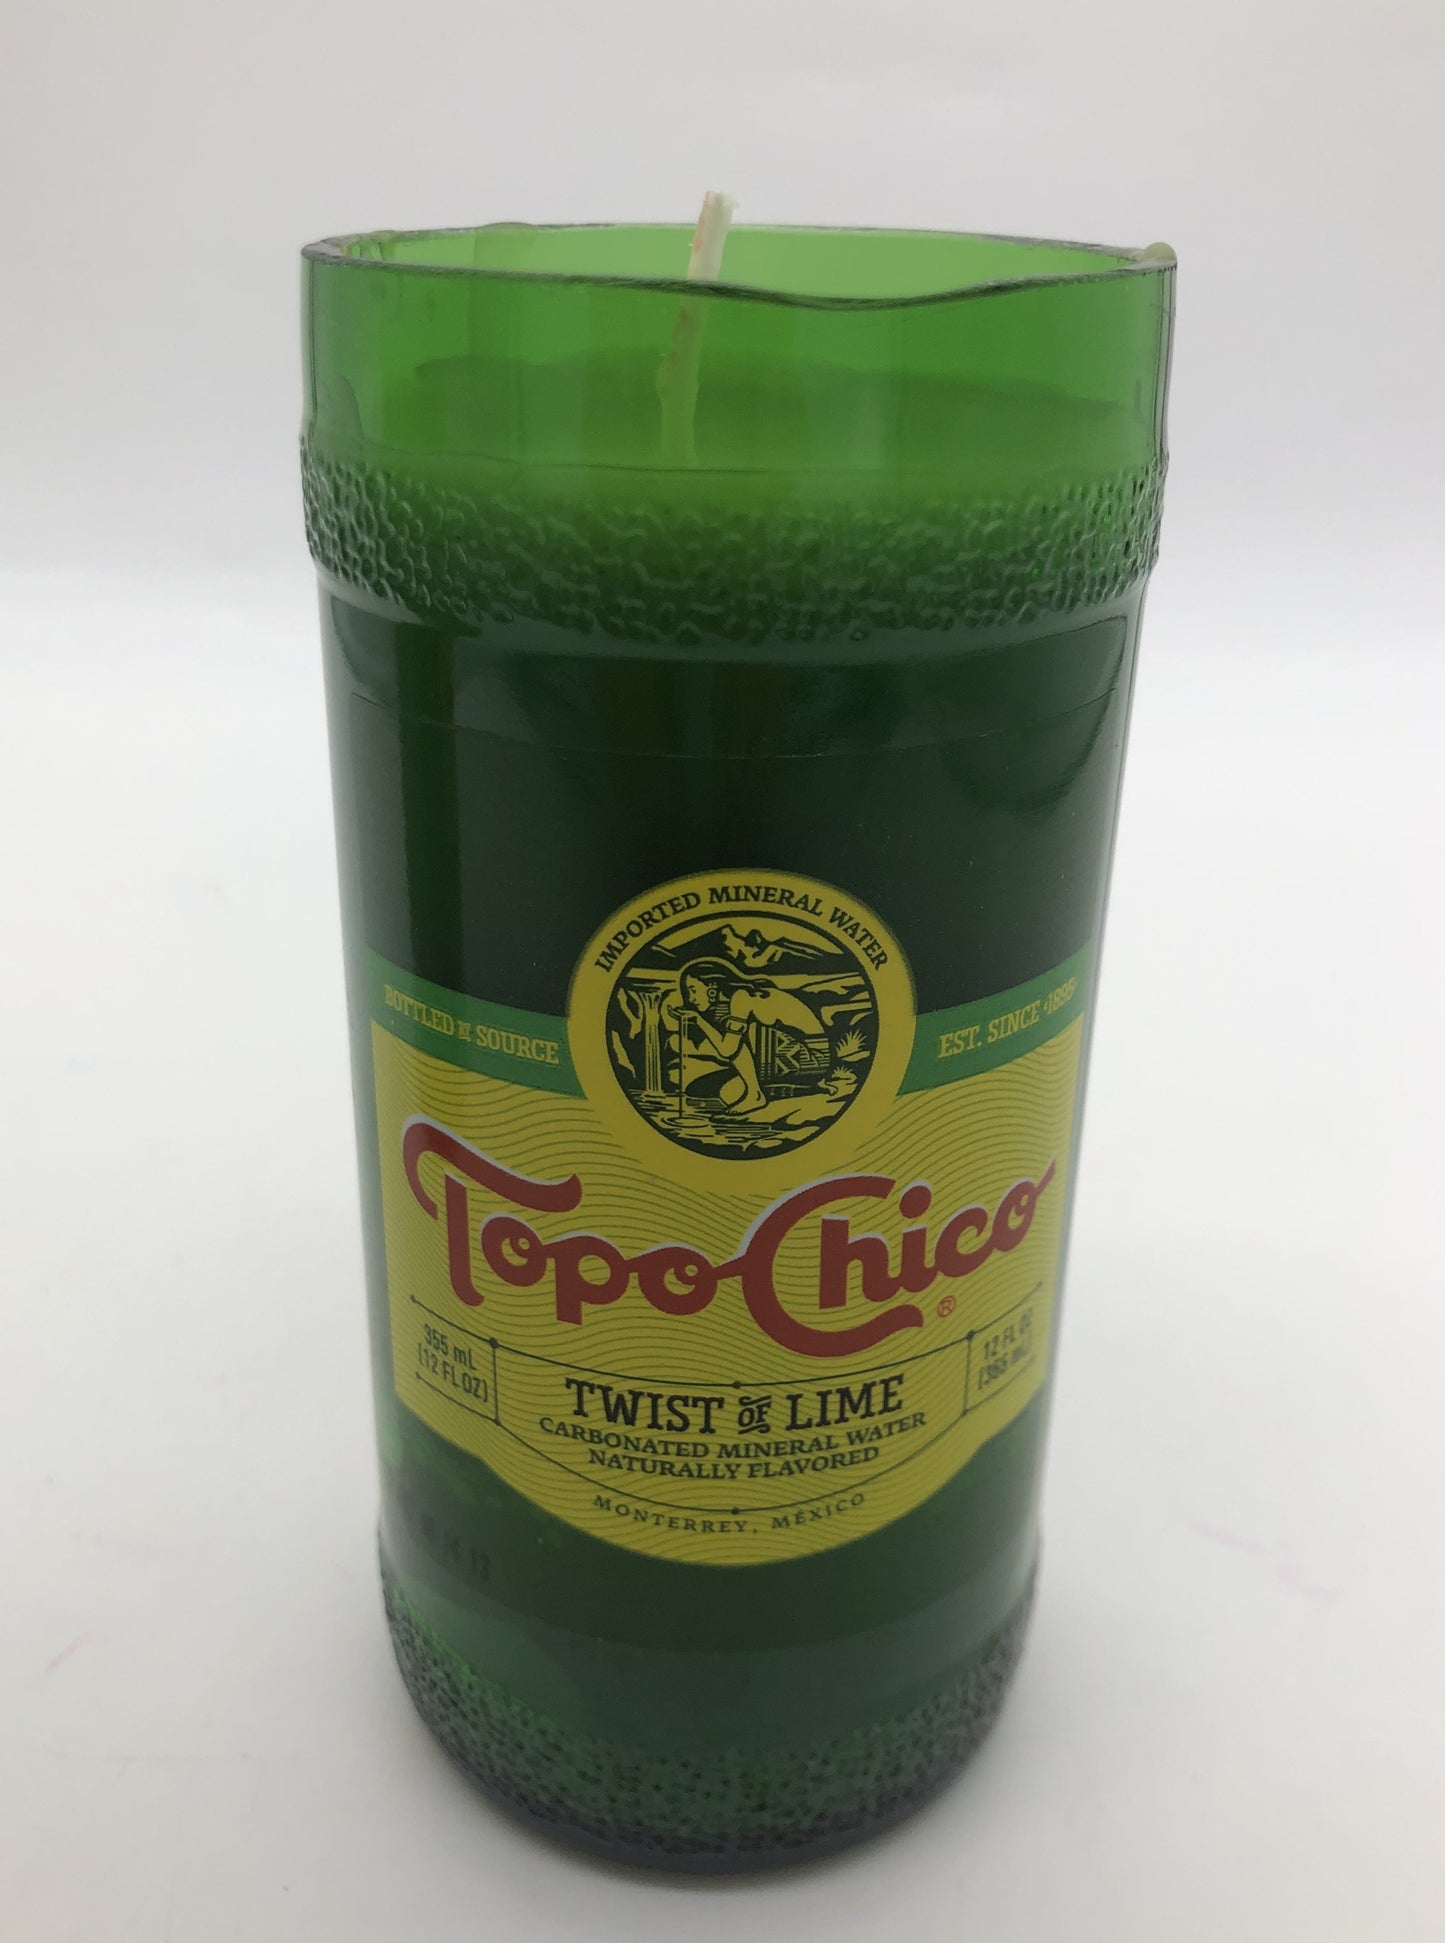 Cut green bottle of Topo Chico with light green candle inside.